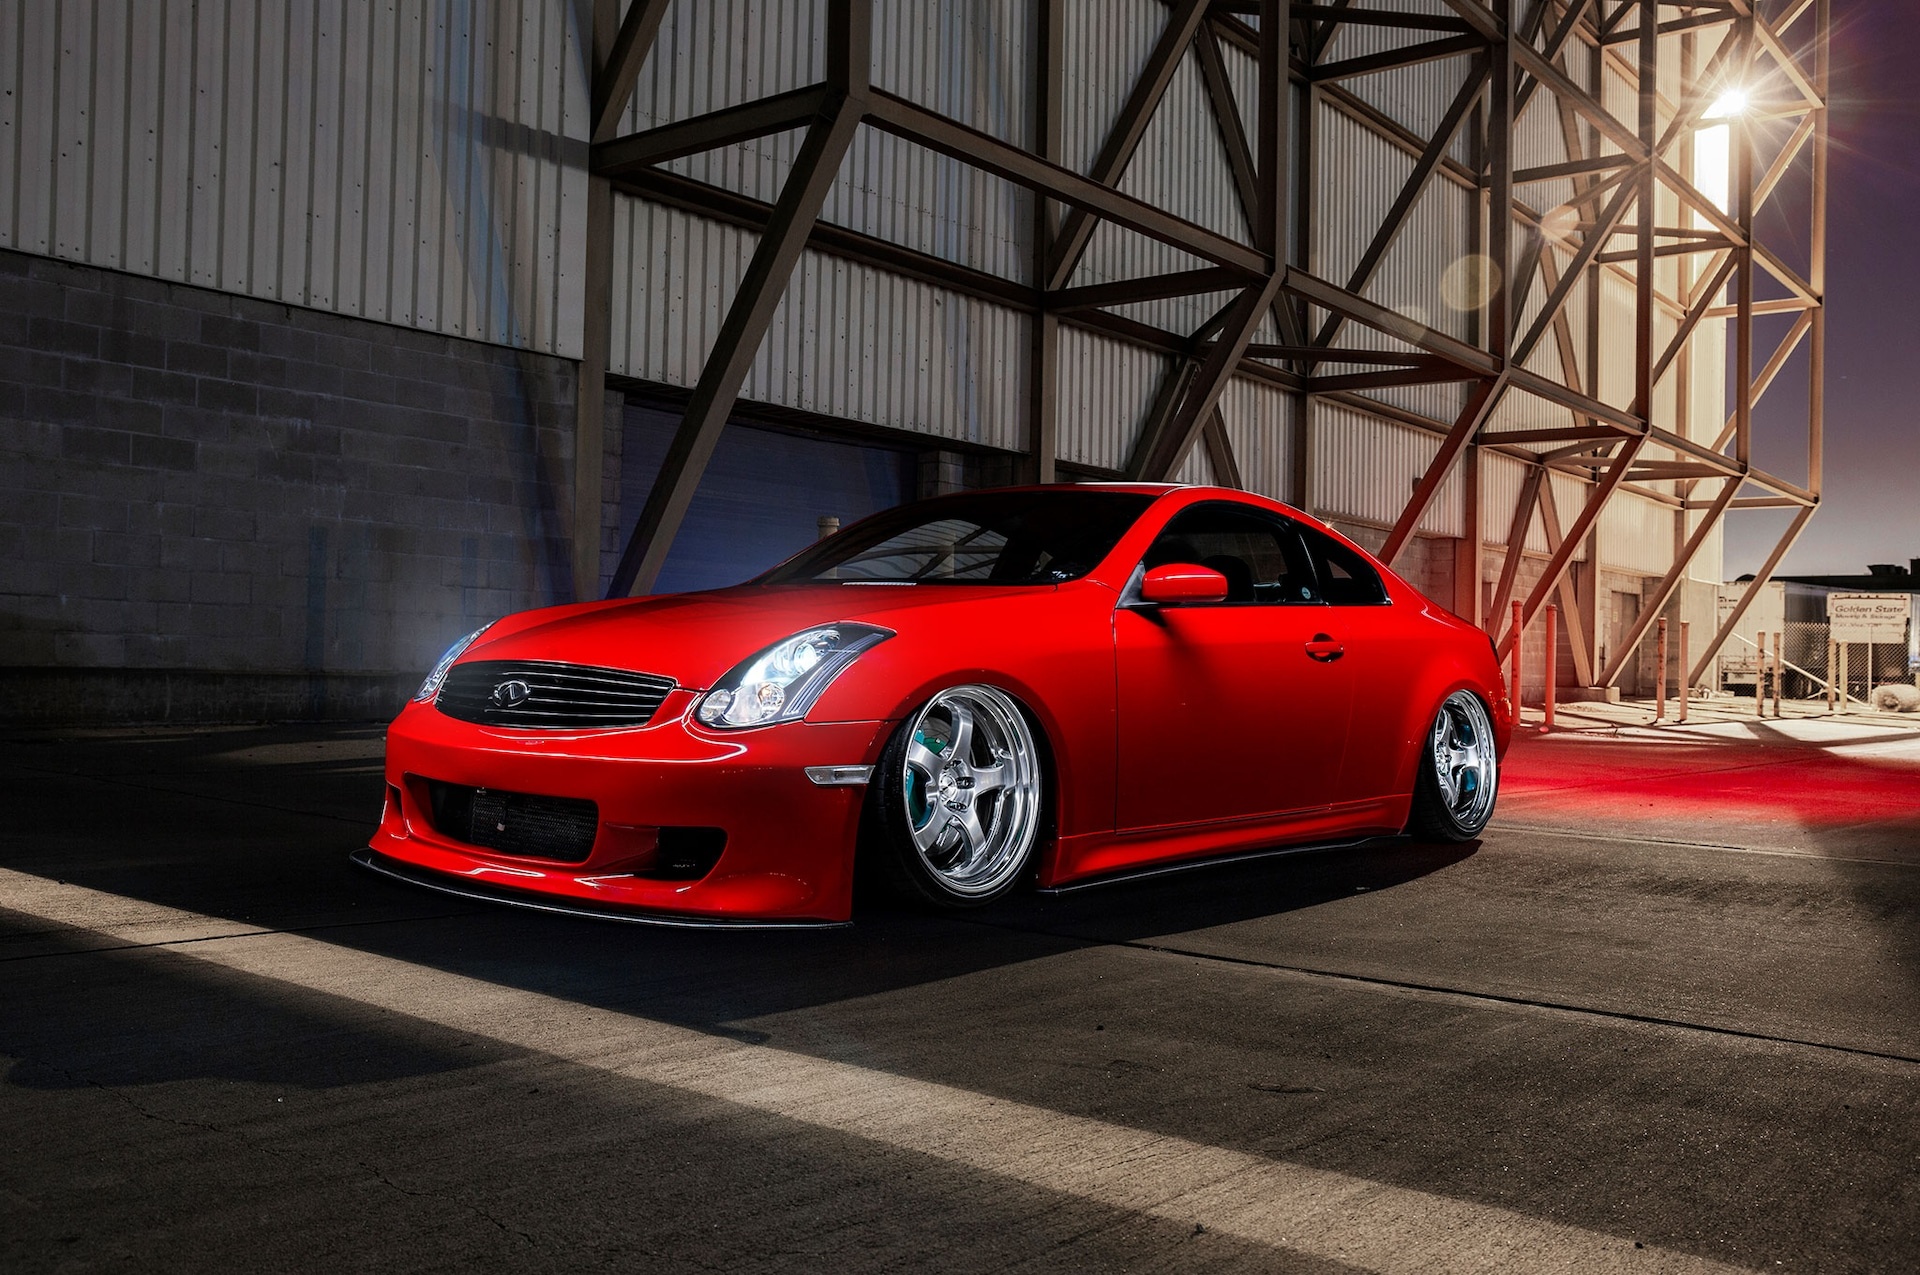 Infiniti G35 Coupe, Supercharged beauty, Impeccable auto, Spotless perfection, 1920x1280 HD Desktop